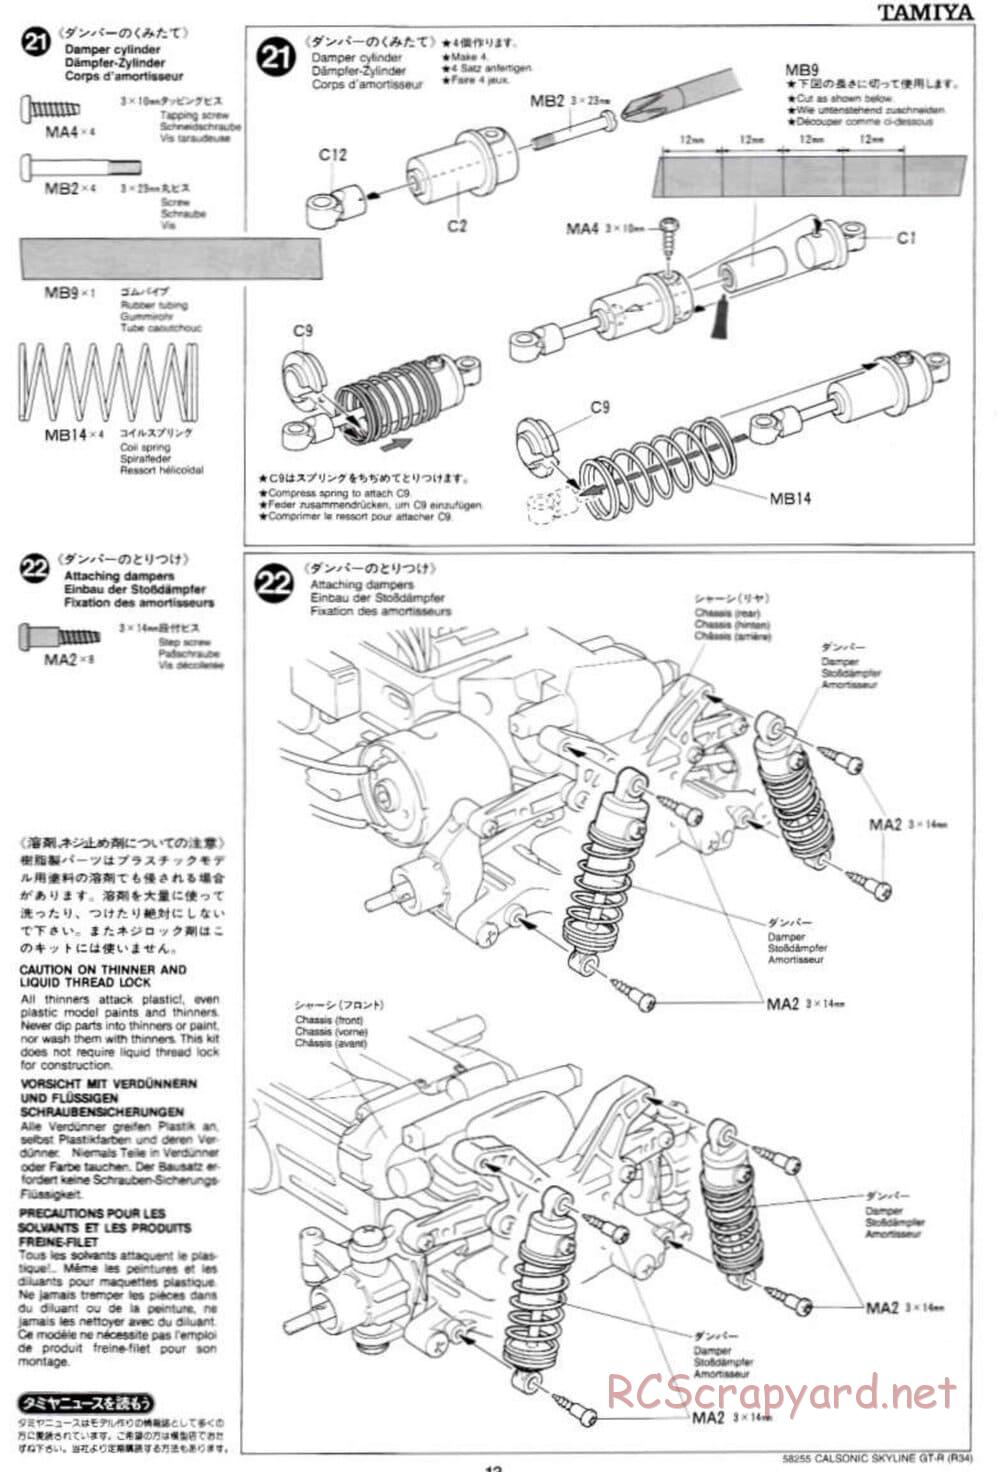 Tamiya - Calsonic Skyline GT-R (R34) - TL-01 Chassis - Manual - Page 13